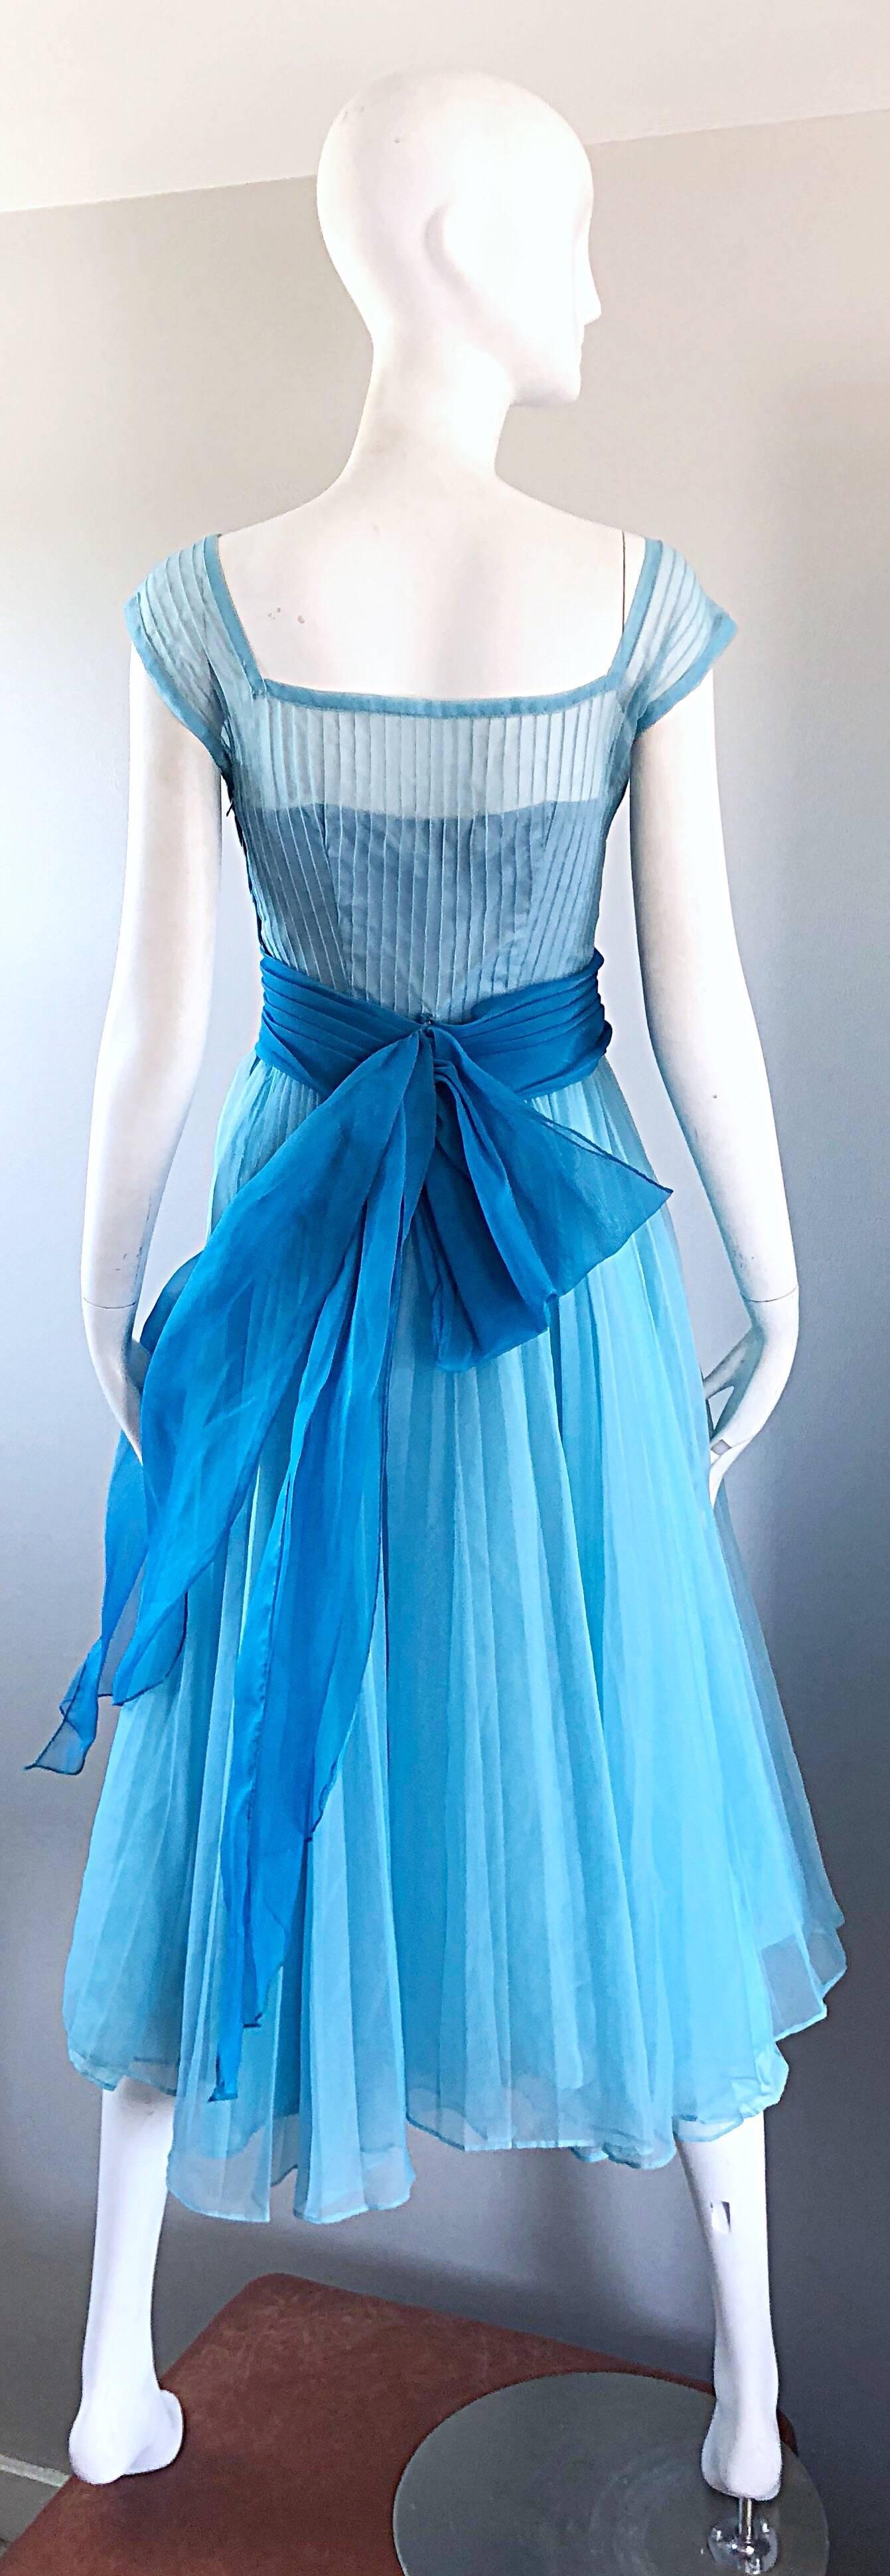 1950s Fred Perlberg Beautiful Robins Egg Blue Fit n' Flare Vintage 50s Dress For Sale 3